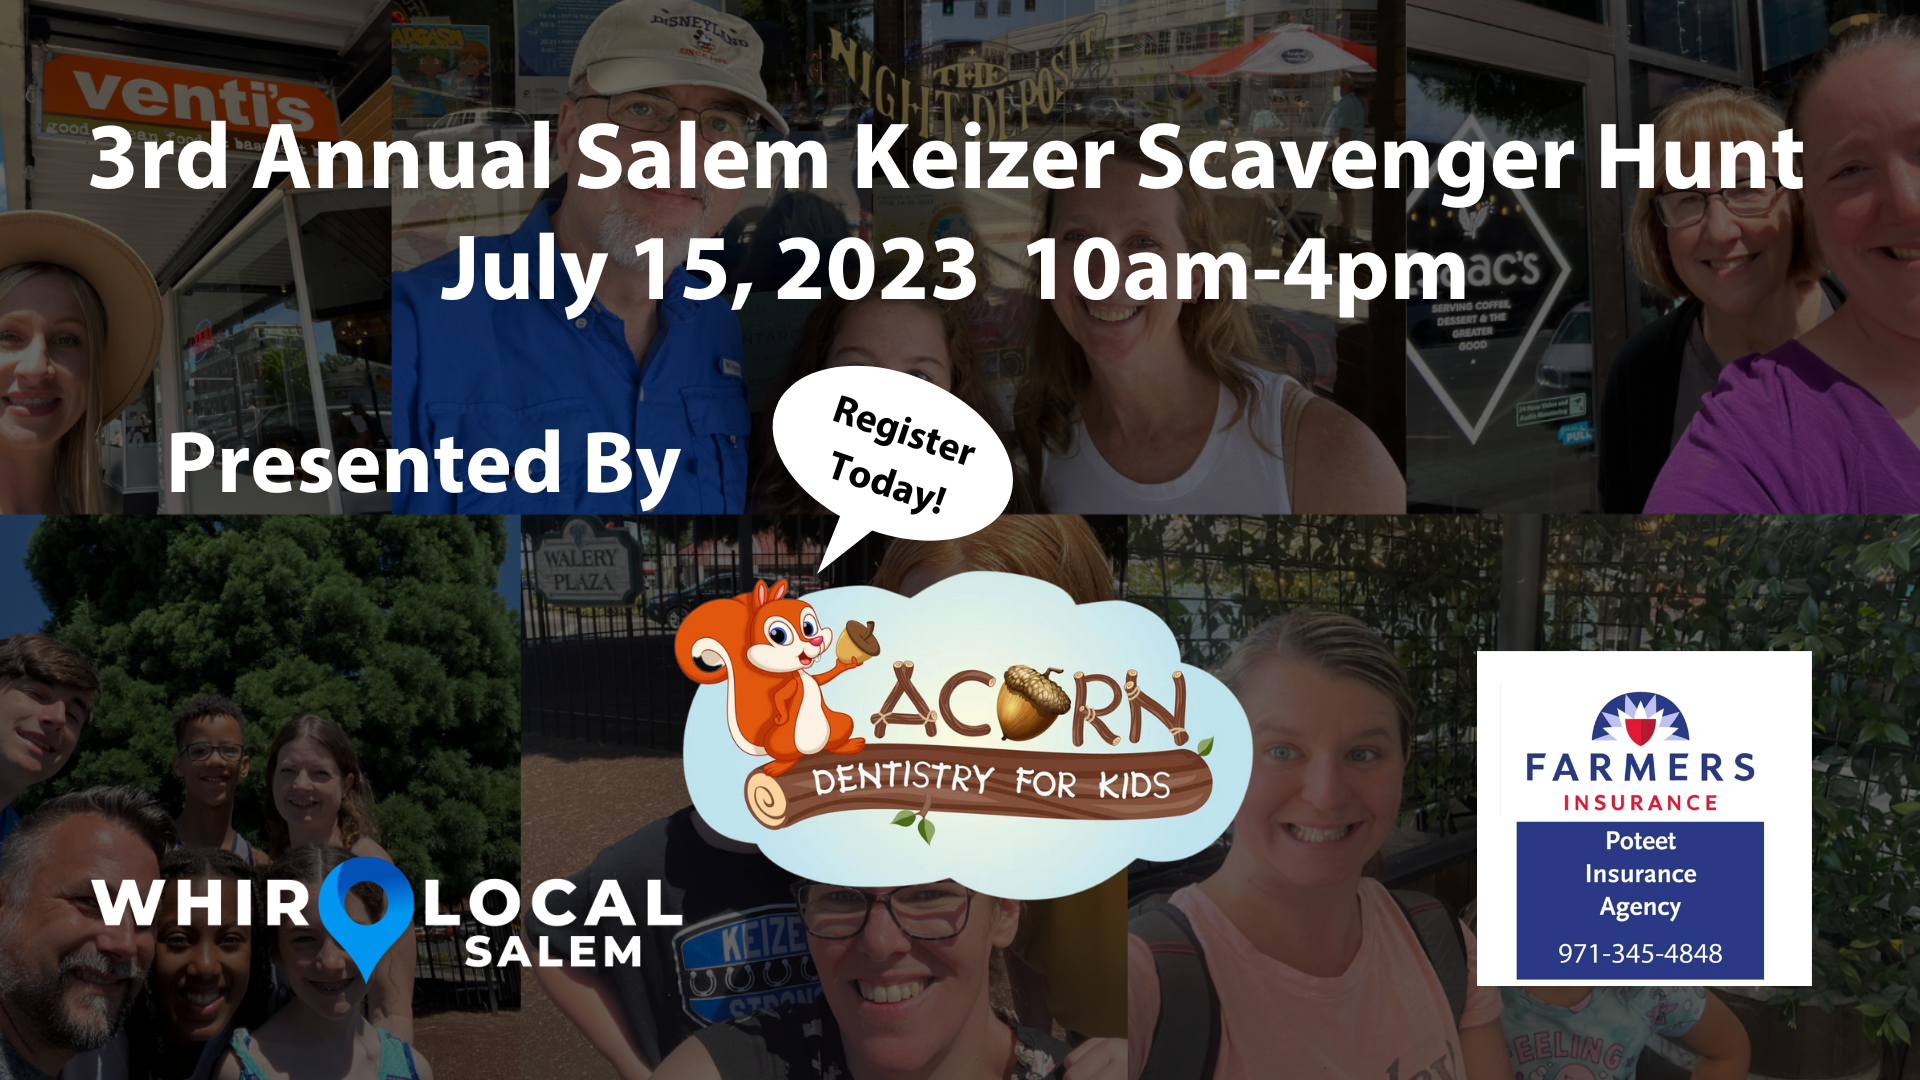 Embark on an Adventure at the 3rd Annual Salem/Keizer Scavenger Hunt